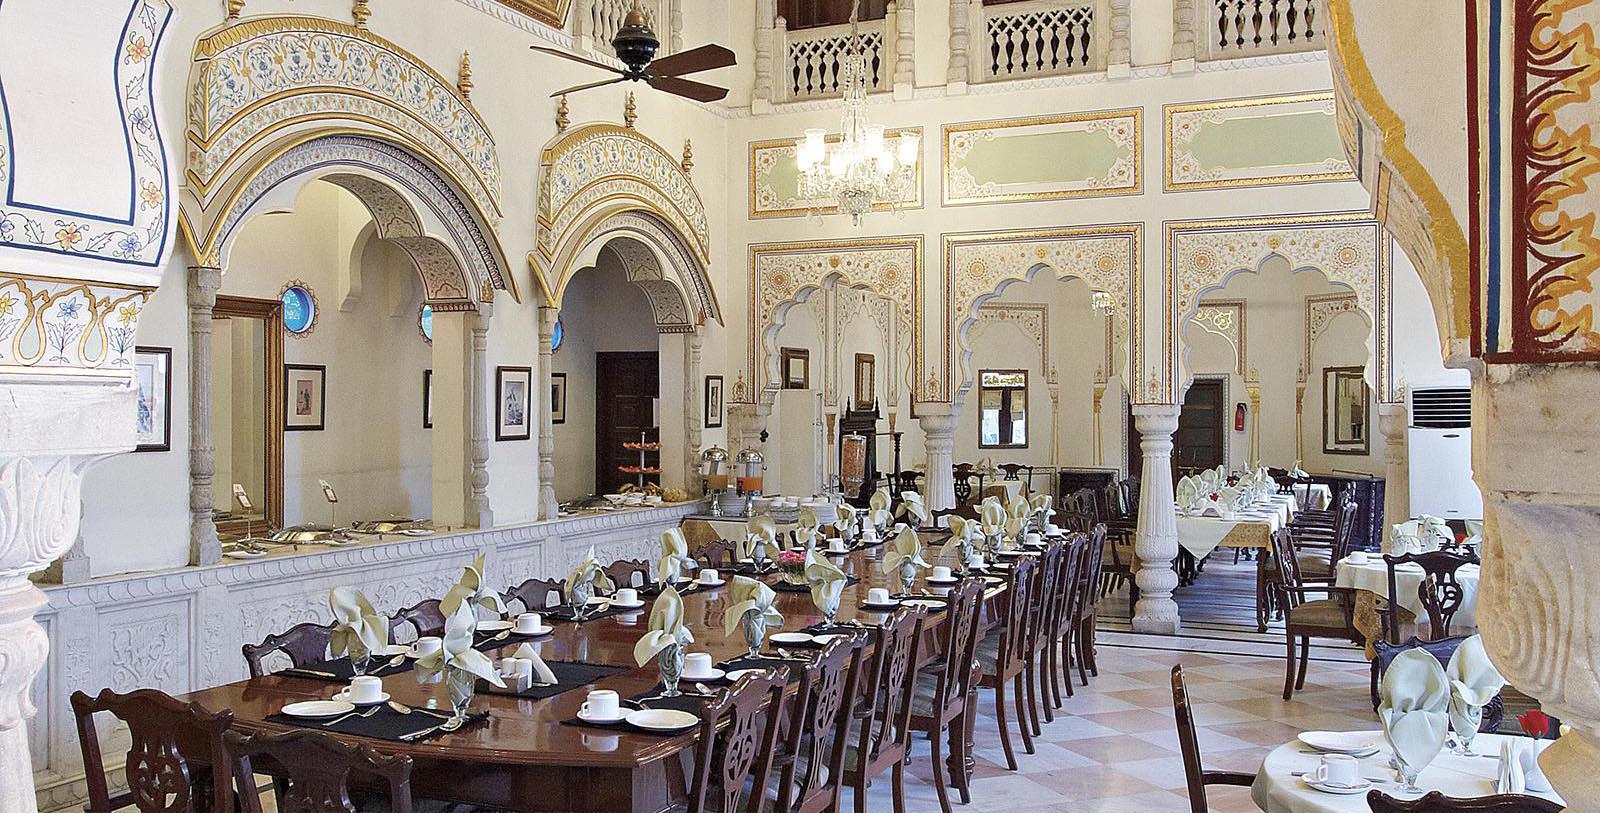 Taste a meal fit for royalty at Alsisar Haveli's Darbar Hall.